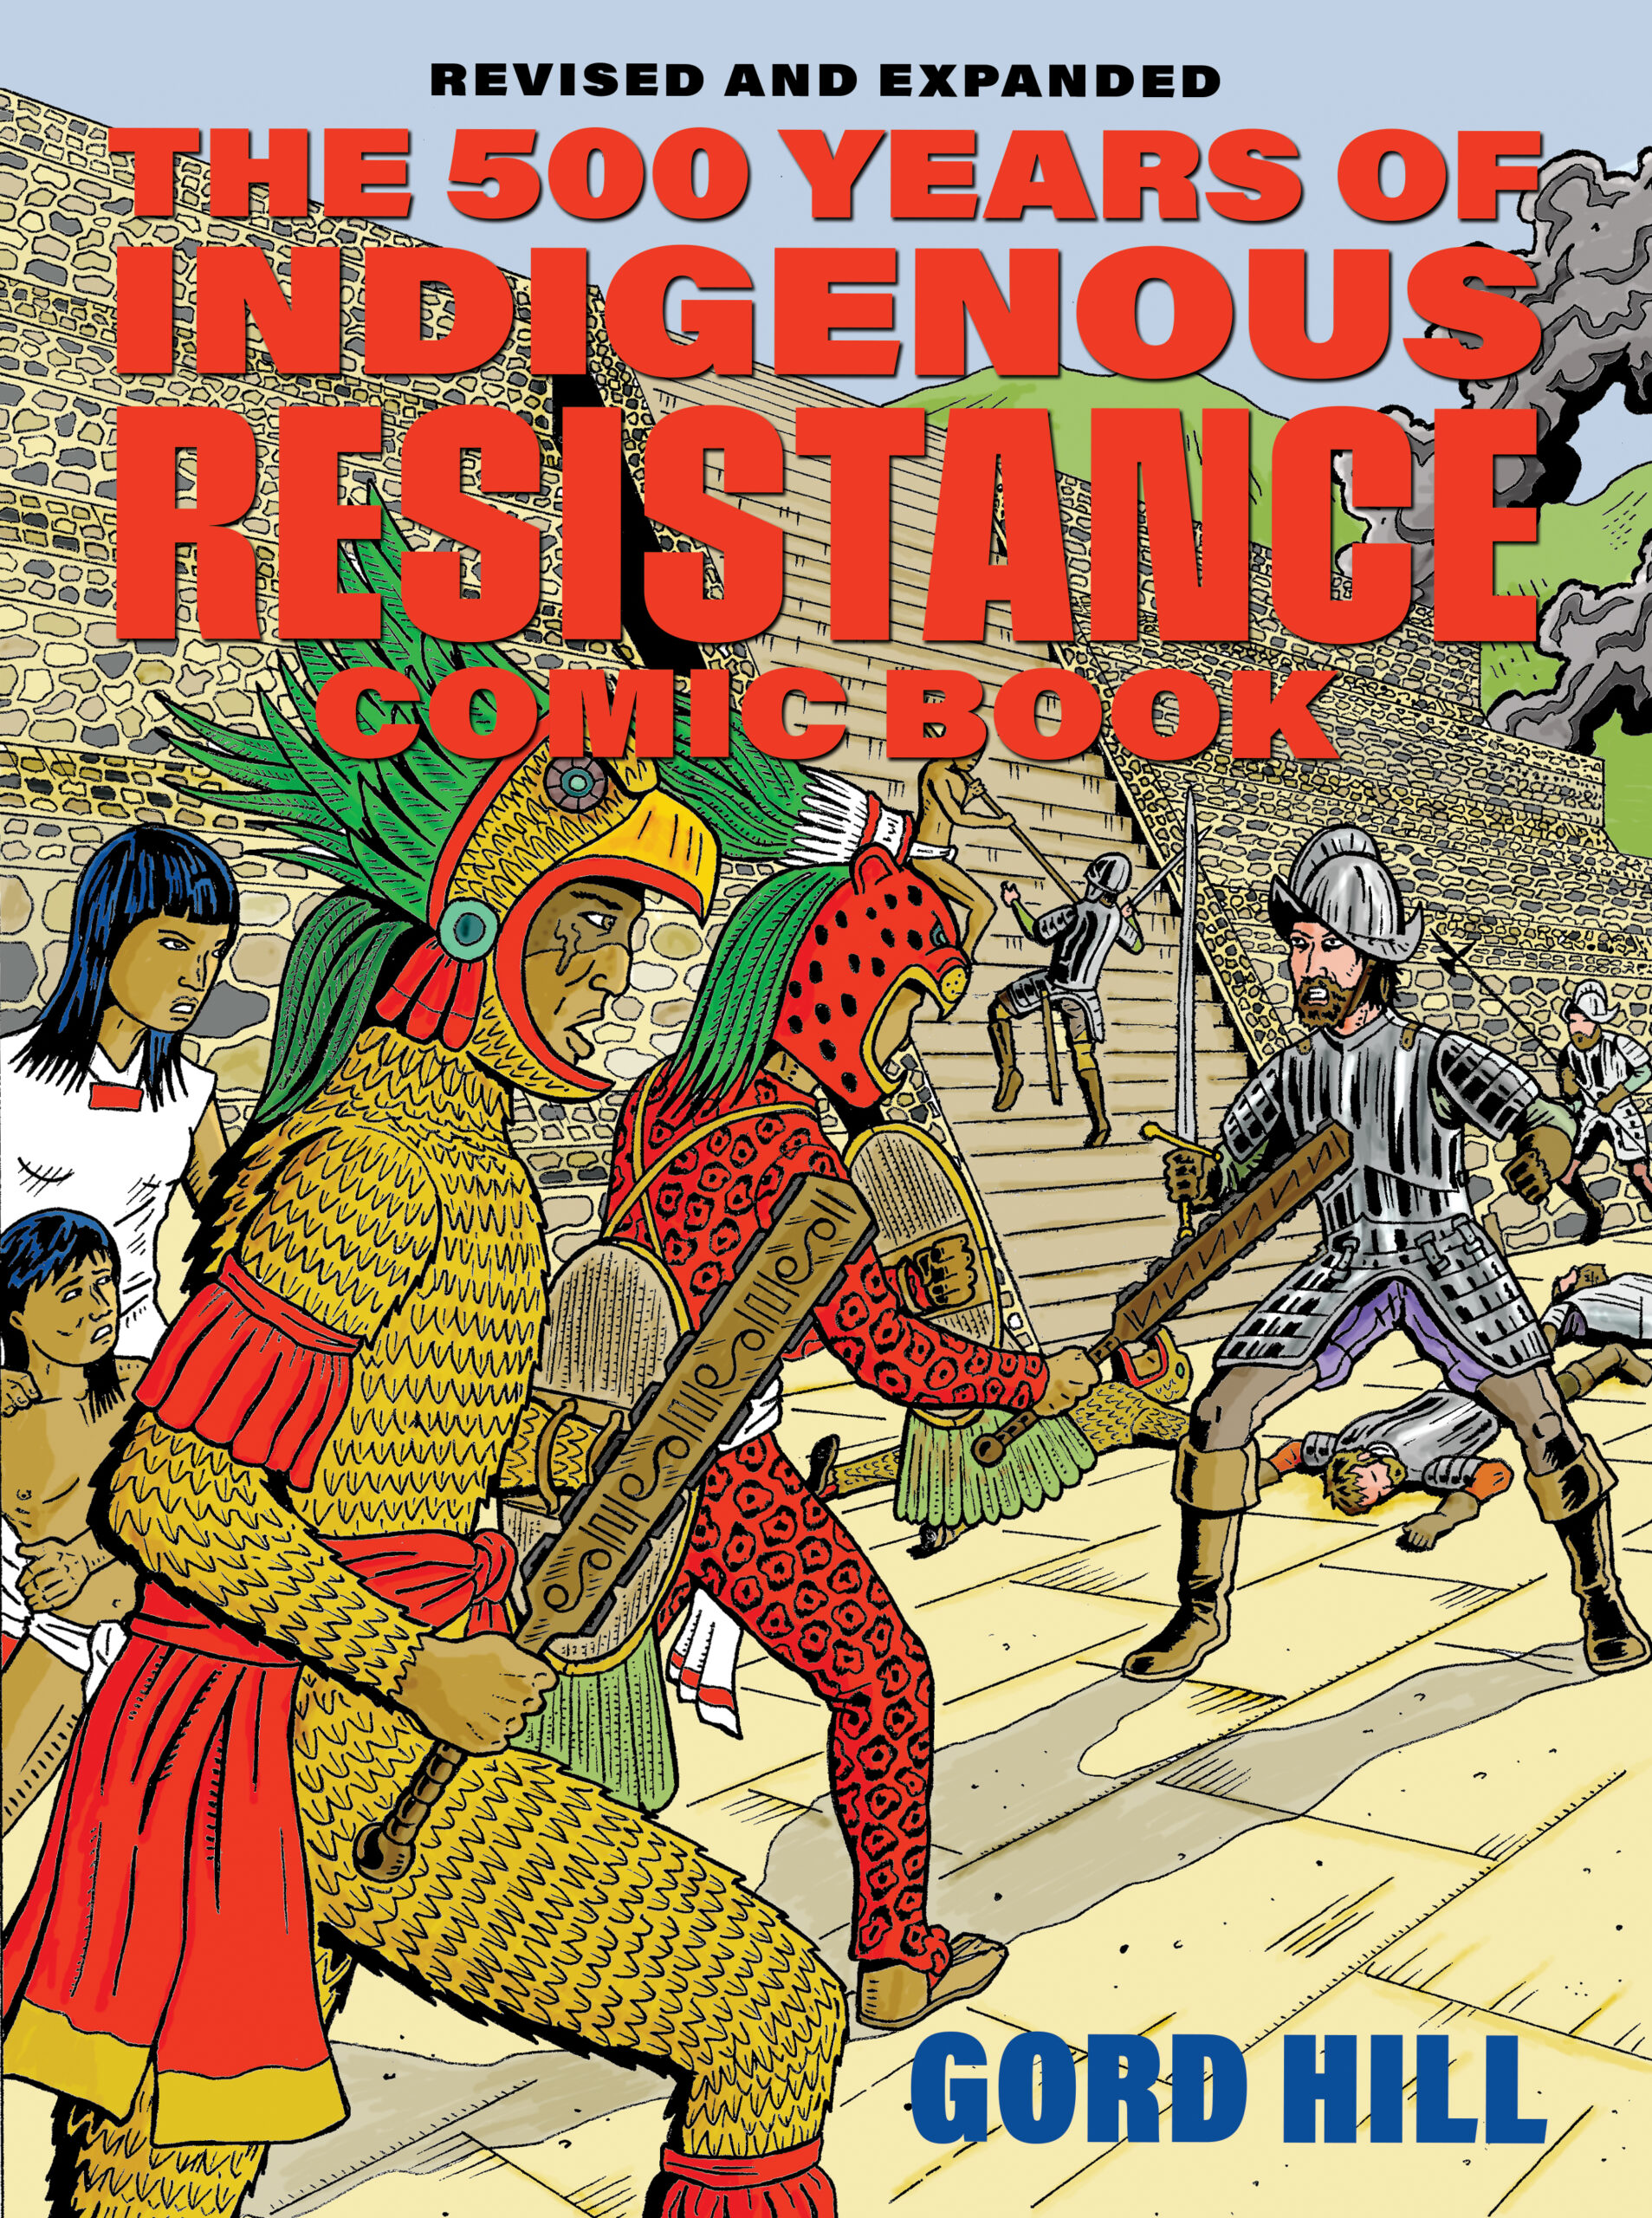 The 500 Years of Resistance Comic Book book cover